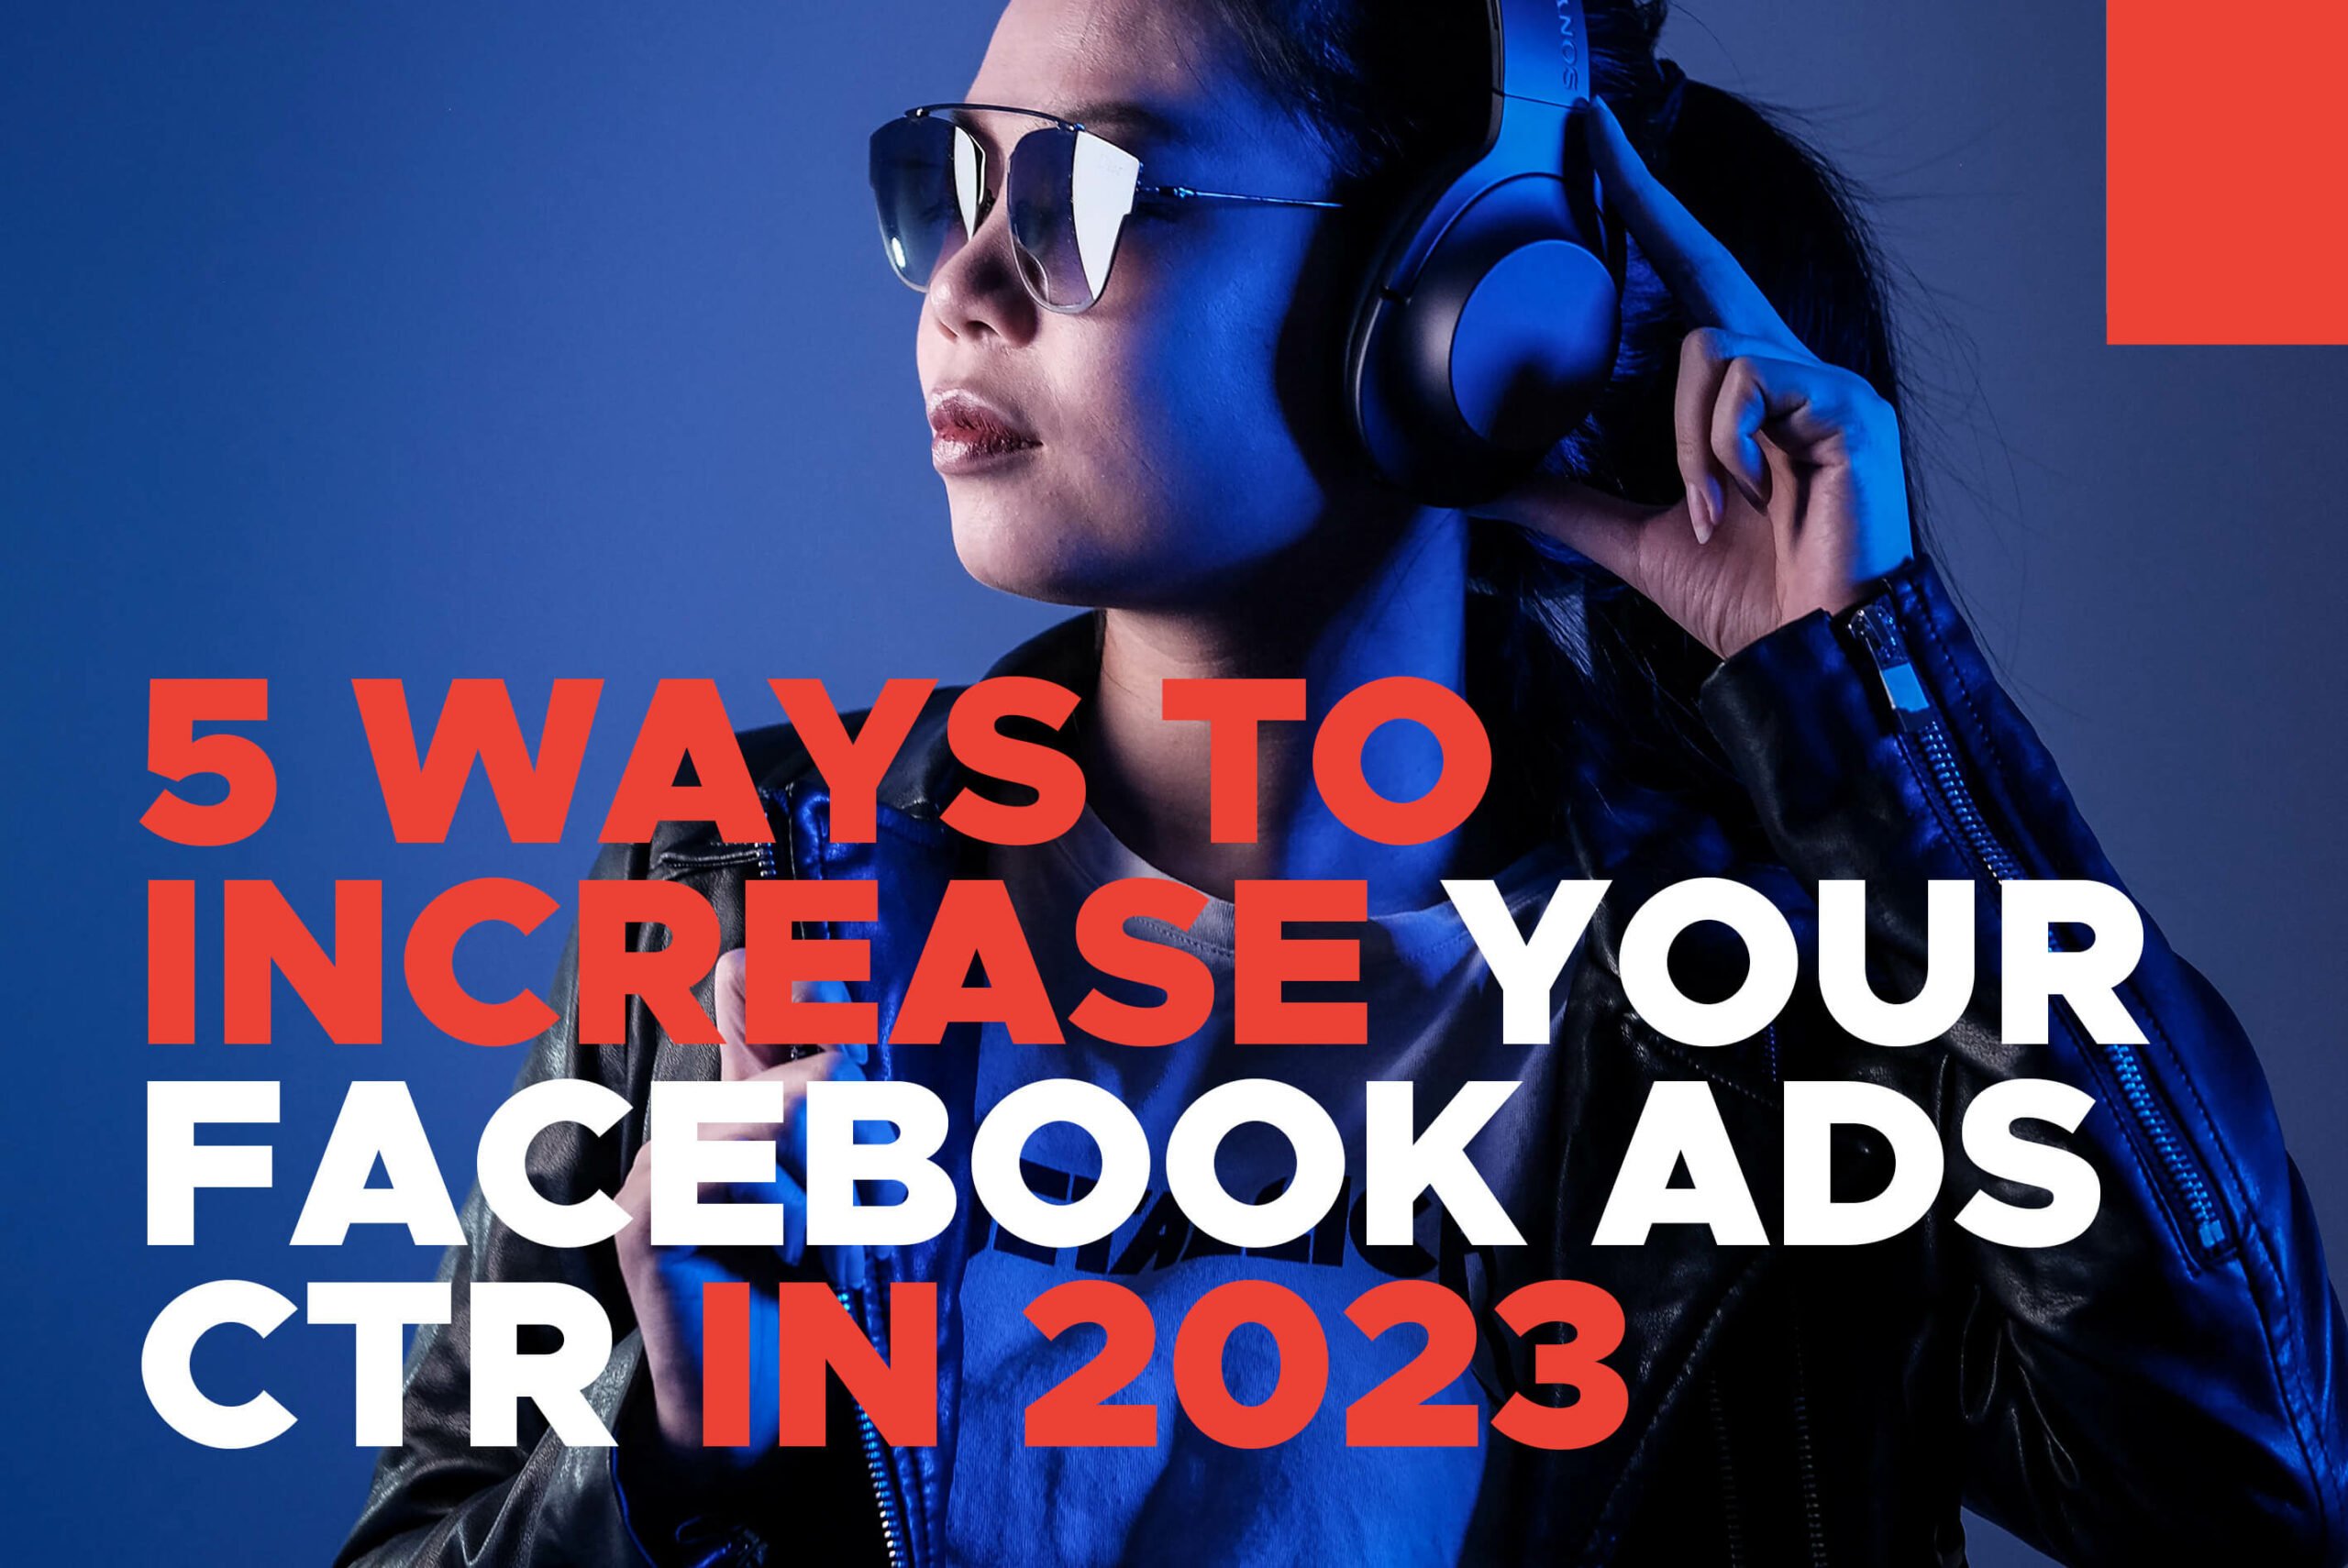 5 Ways to Increase Your Facebook Ads CTR in 2023